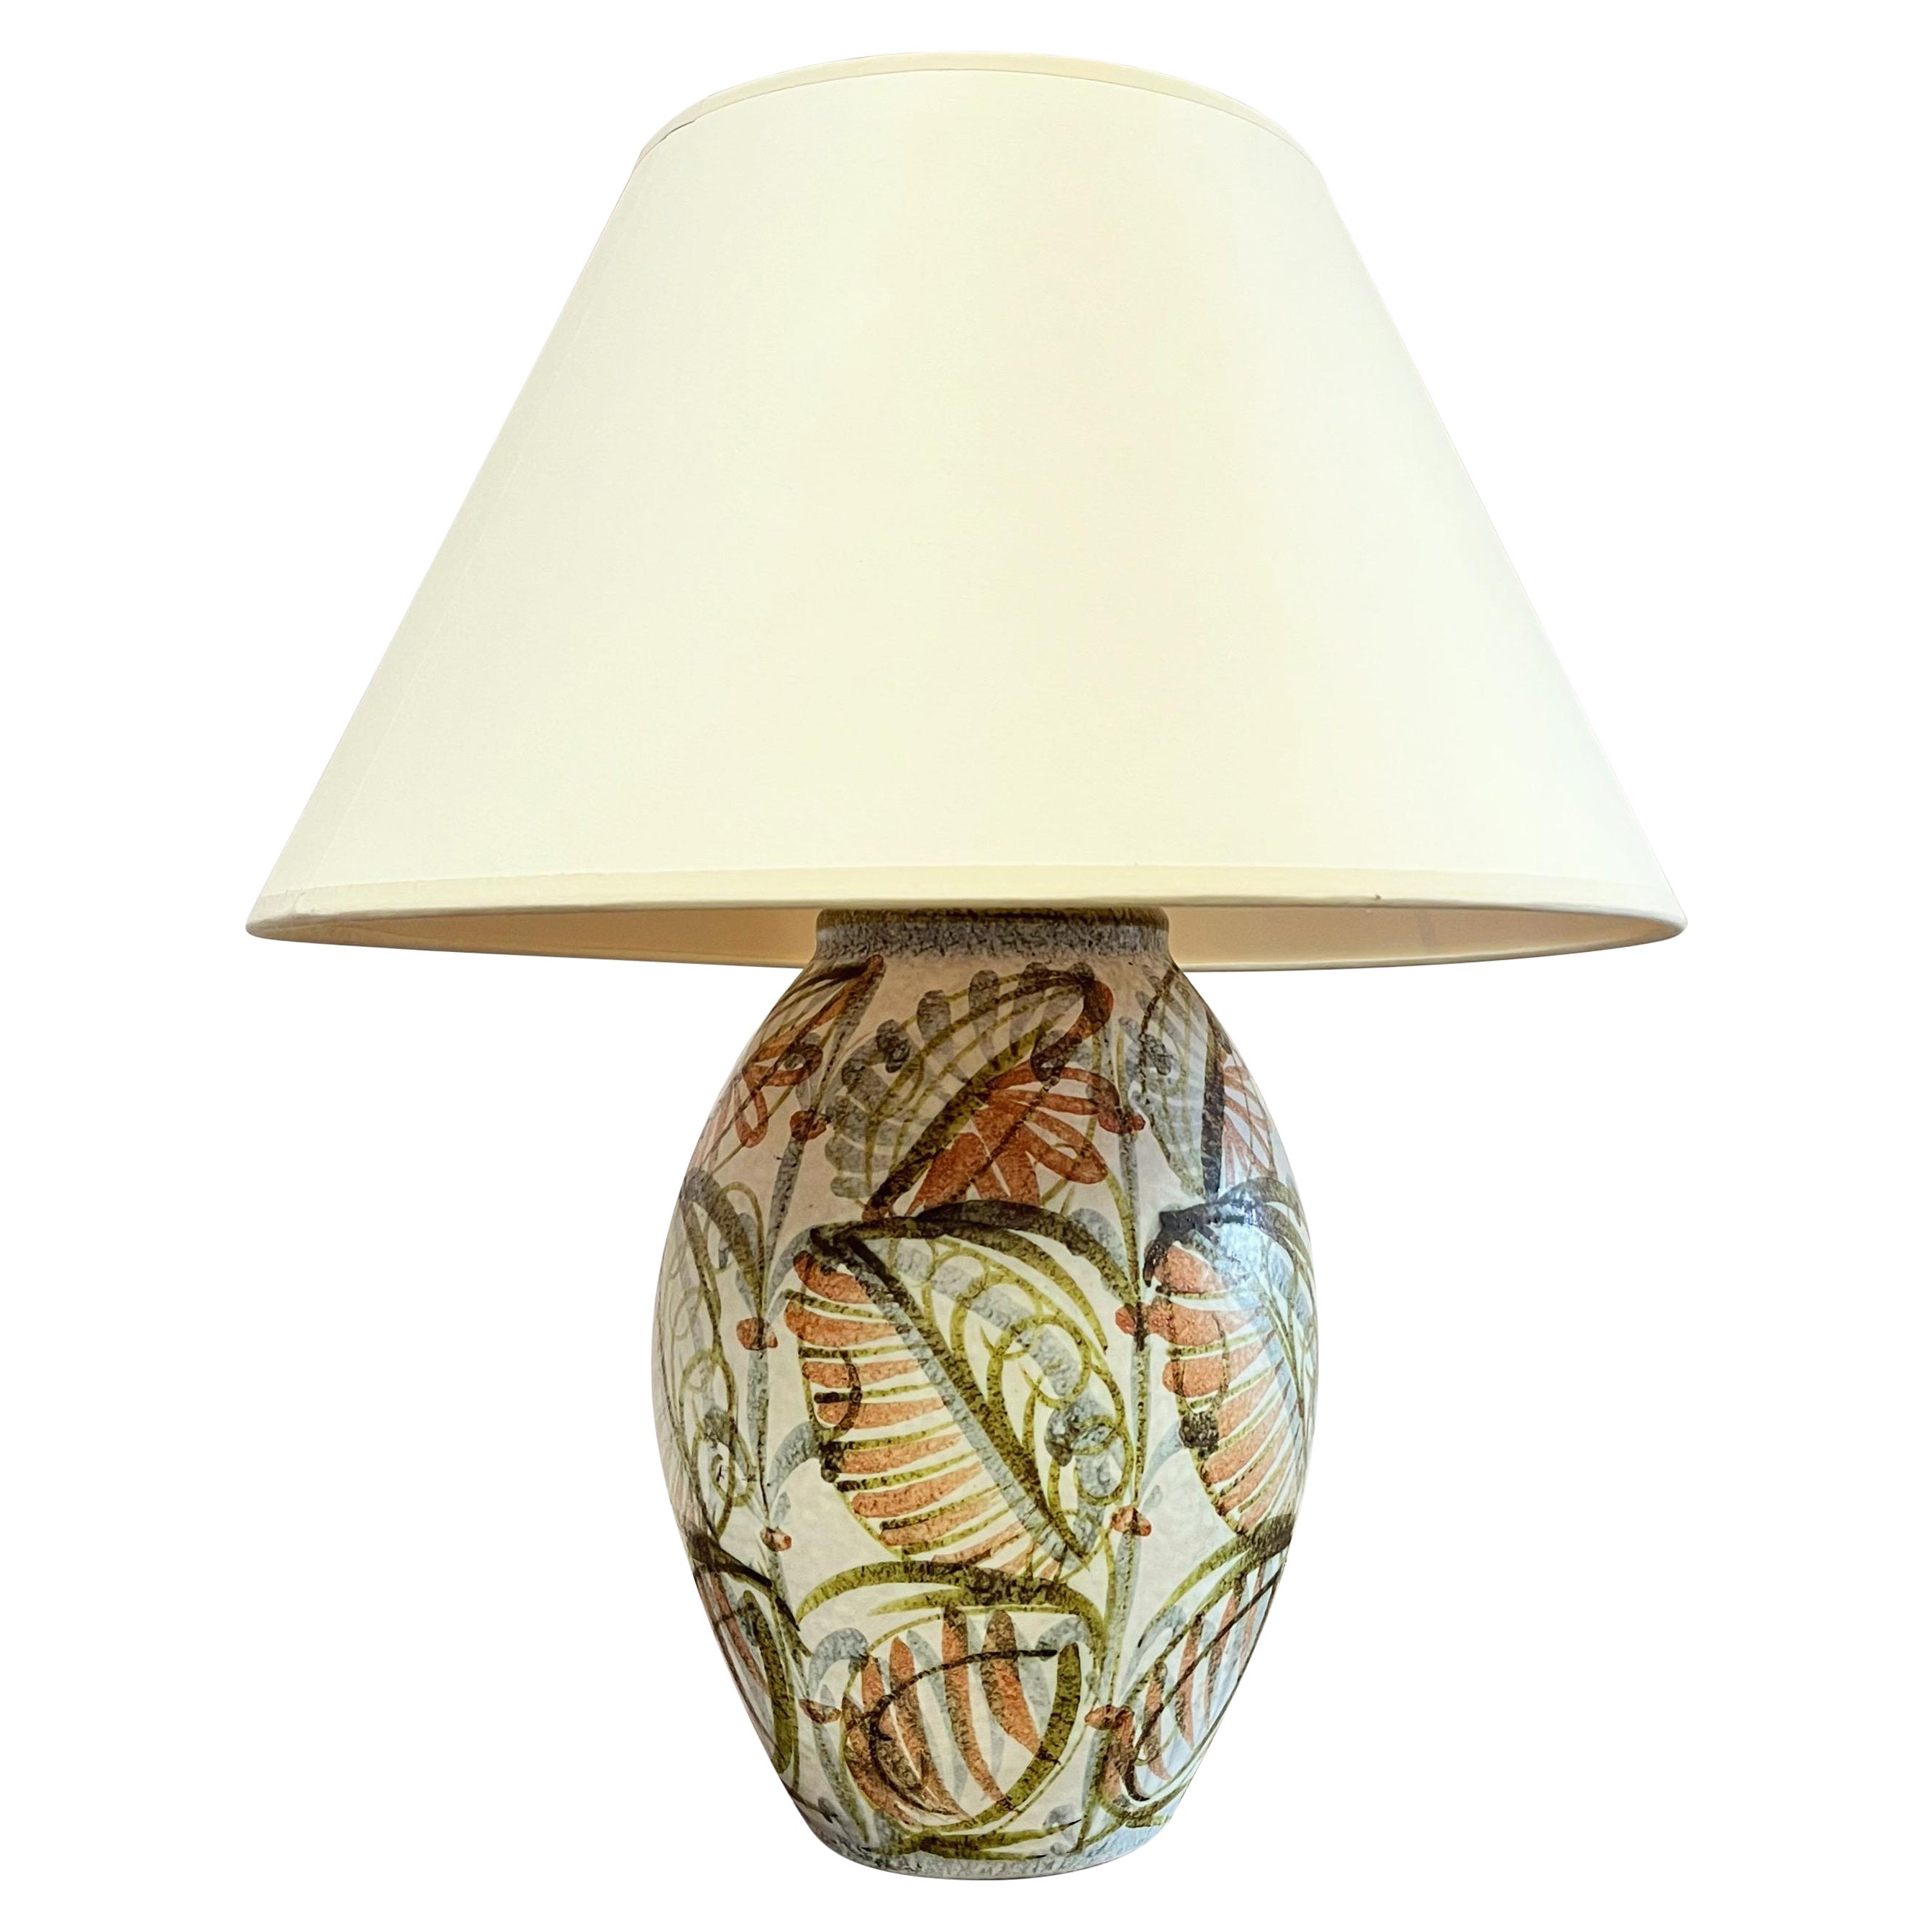 A British Art Pottery Oval Vase, Now Lamp